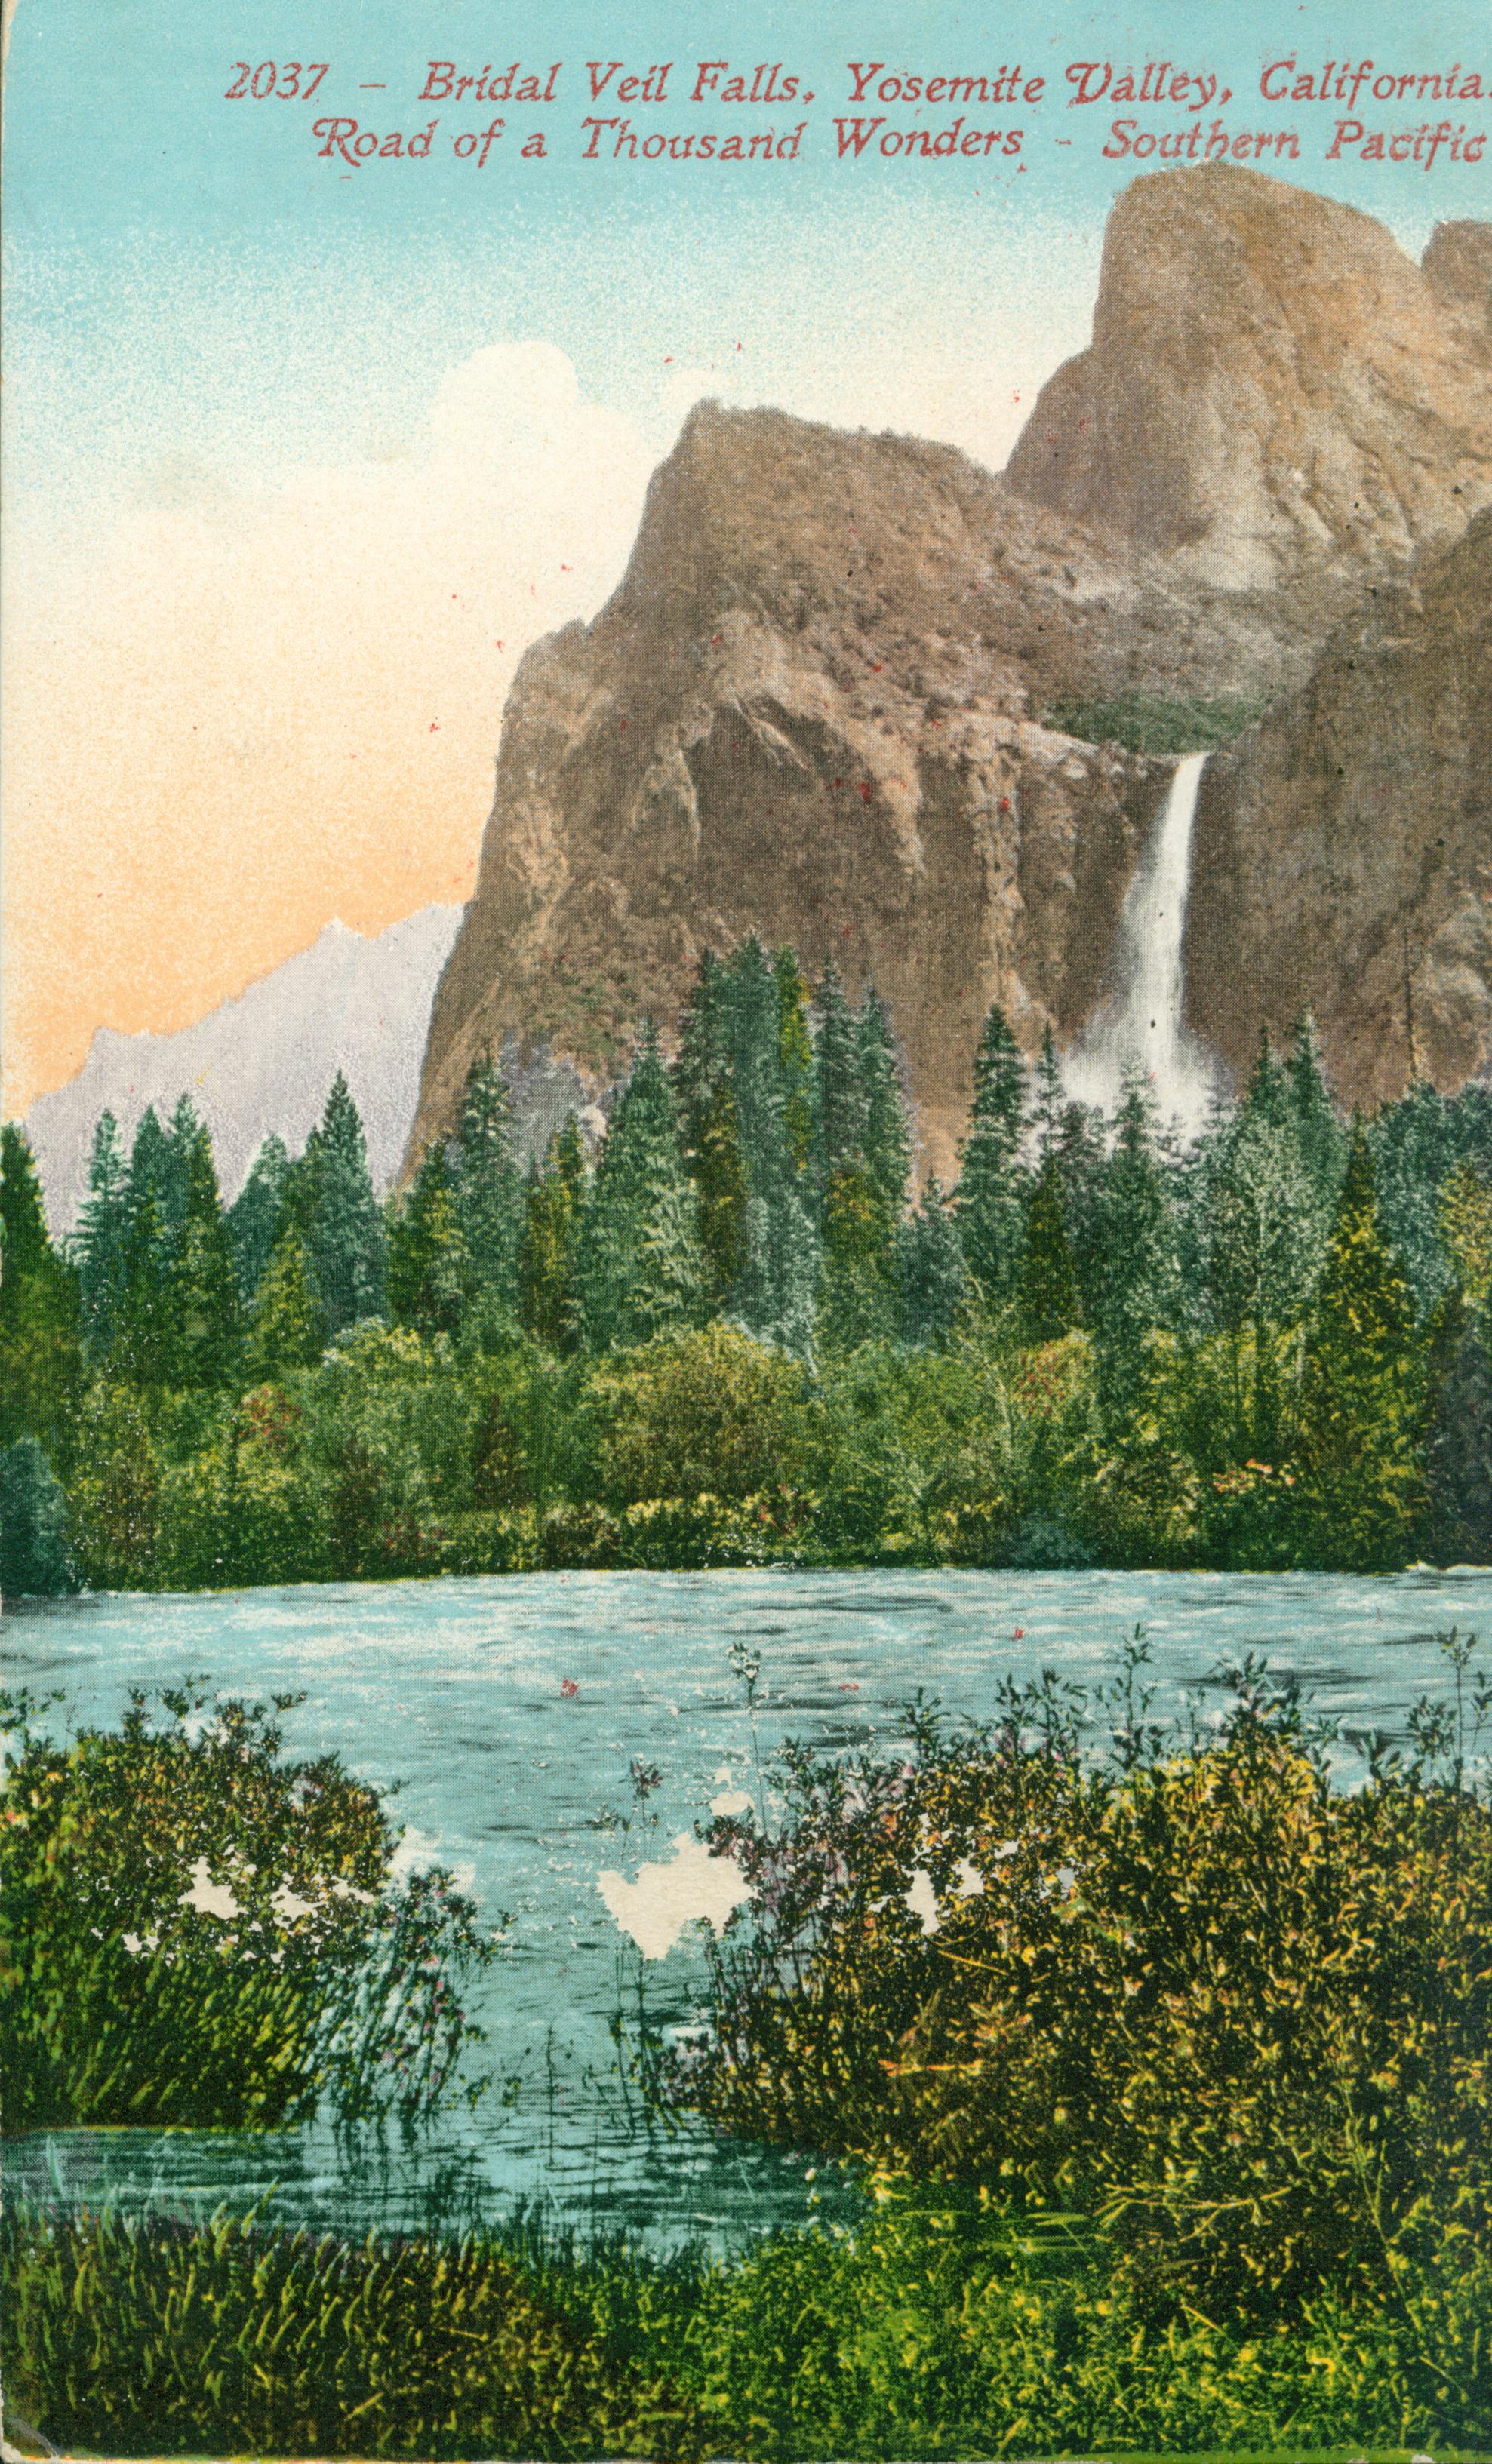 Shows a view of Bridal Veil Falls with a river and trees in the foreground